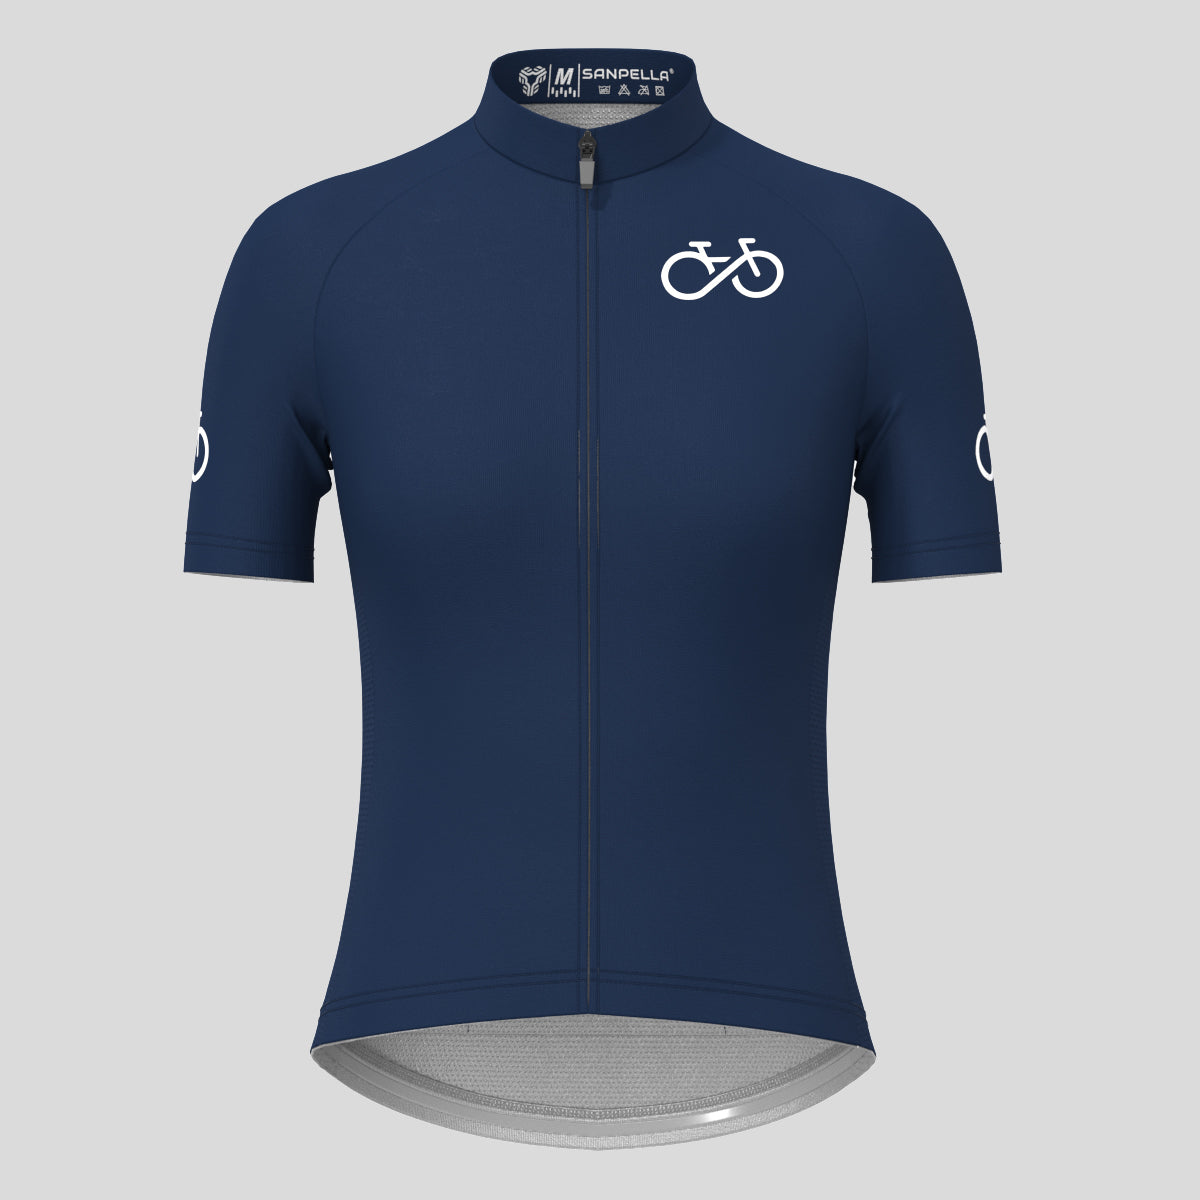 Ride Forever Women's Cycling Jersey - Navy